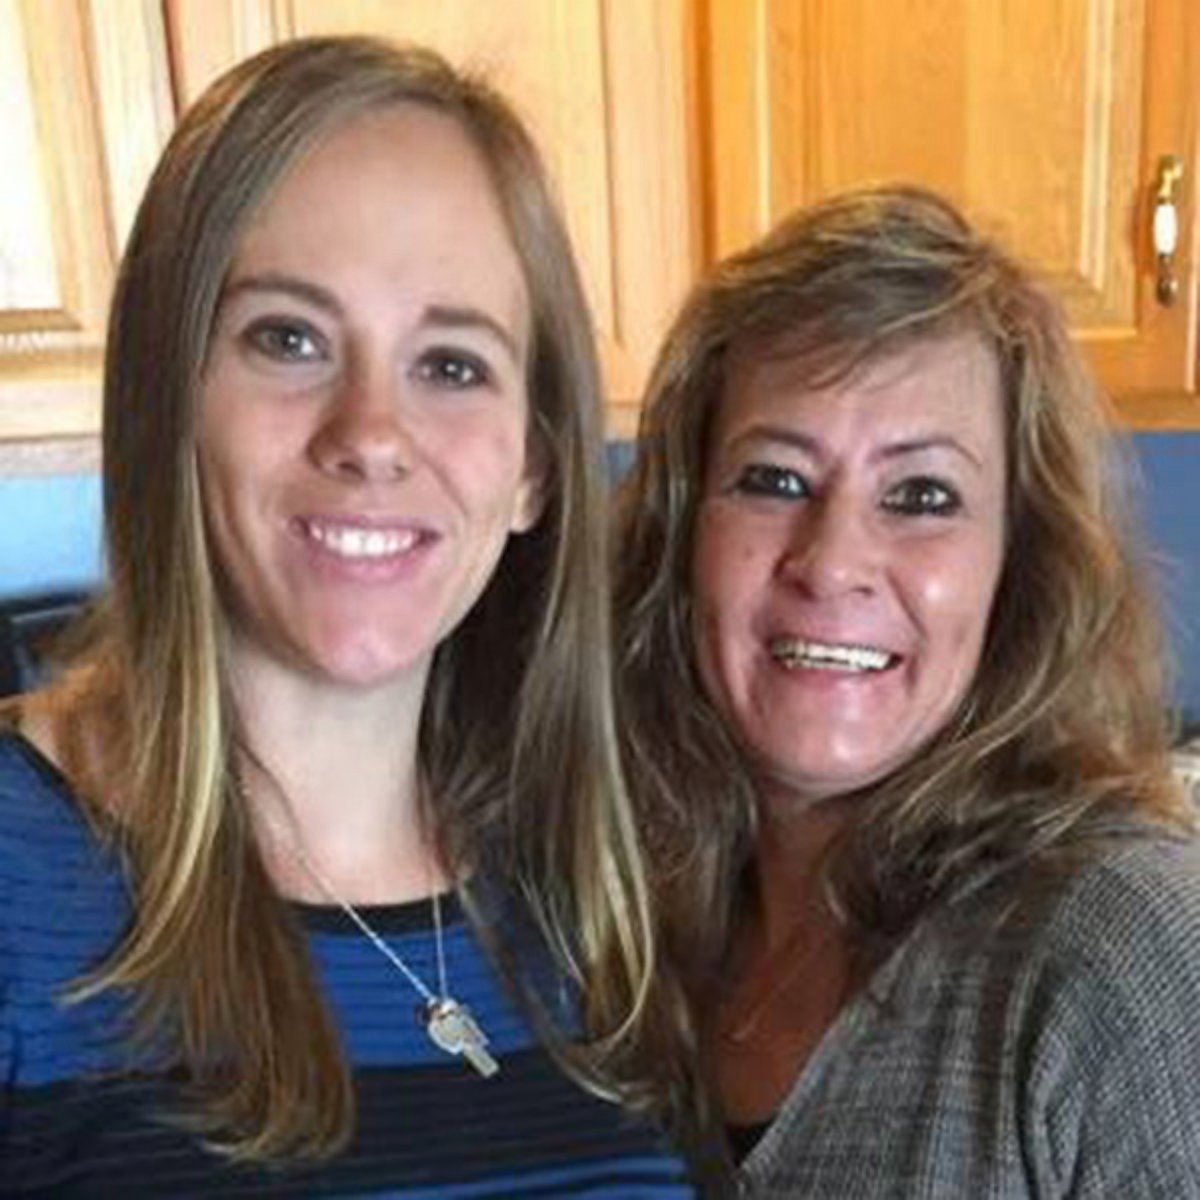 PHOTO: Penny Guyer, 51, of Chambersburg, Pennsylvania was diagnosed with lung cancer November 2015, months after her daughter Tiffany Bowersox's, 32, thyroid cancer diagnosis and 20 years after her son, Shawn, now 24, beat leukemia 20 years ago.